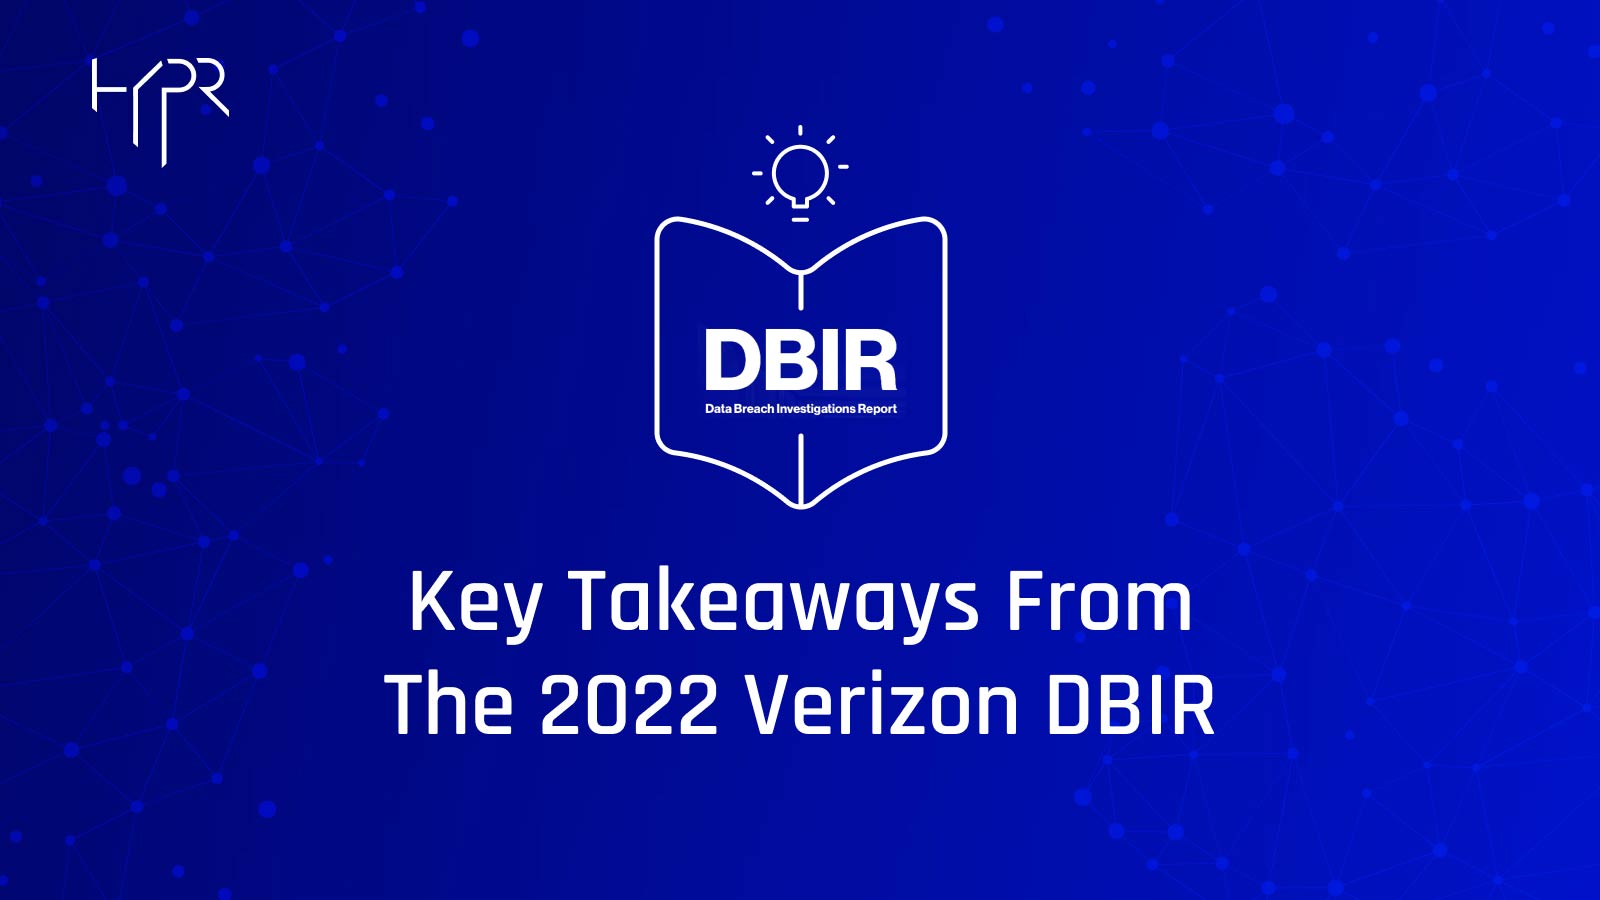 Takeaways From 2022 DBIR: It All Comes Back to Passwords